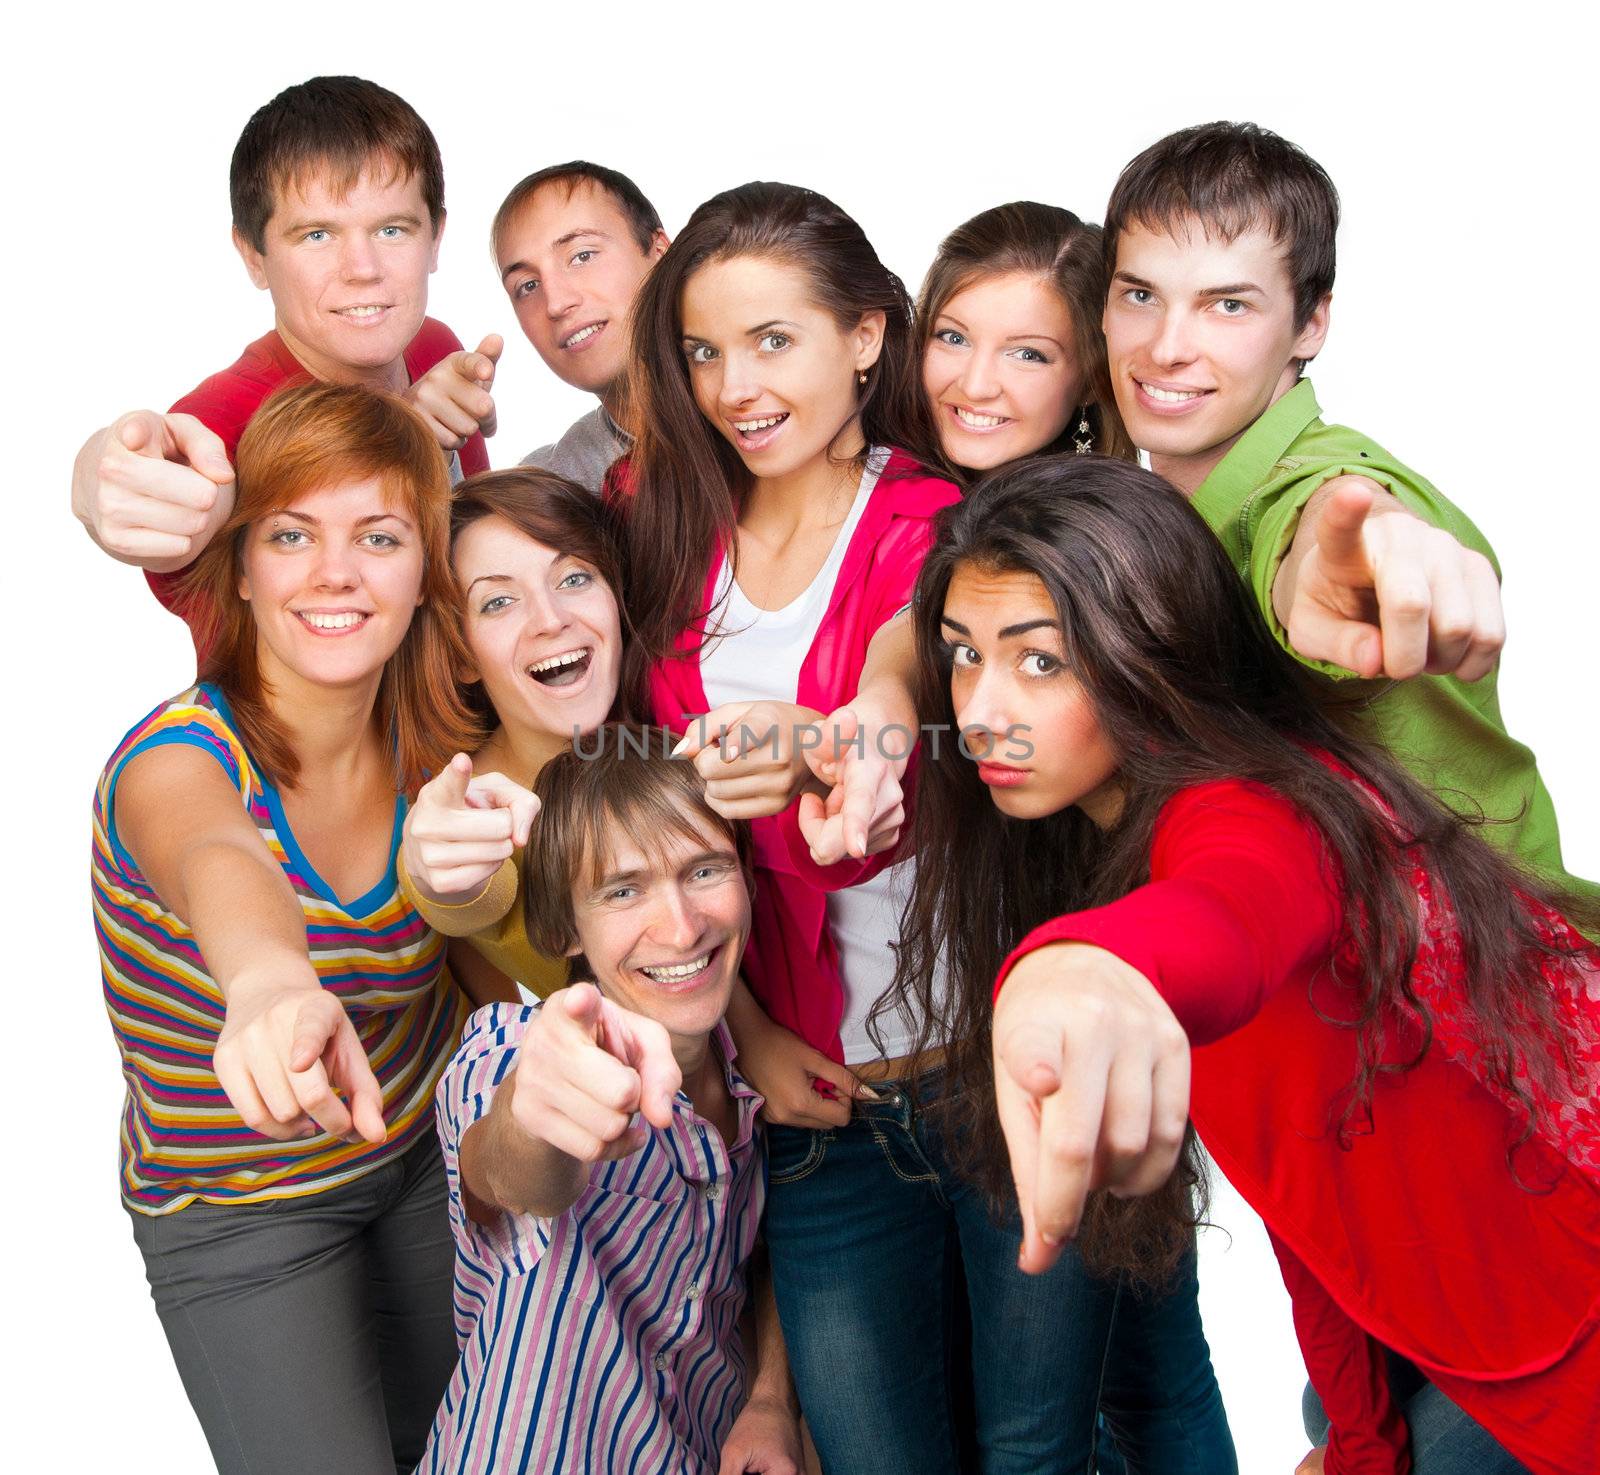 group of casual happy people smiling and shows fingers at the camera